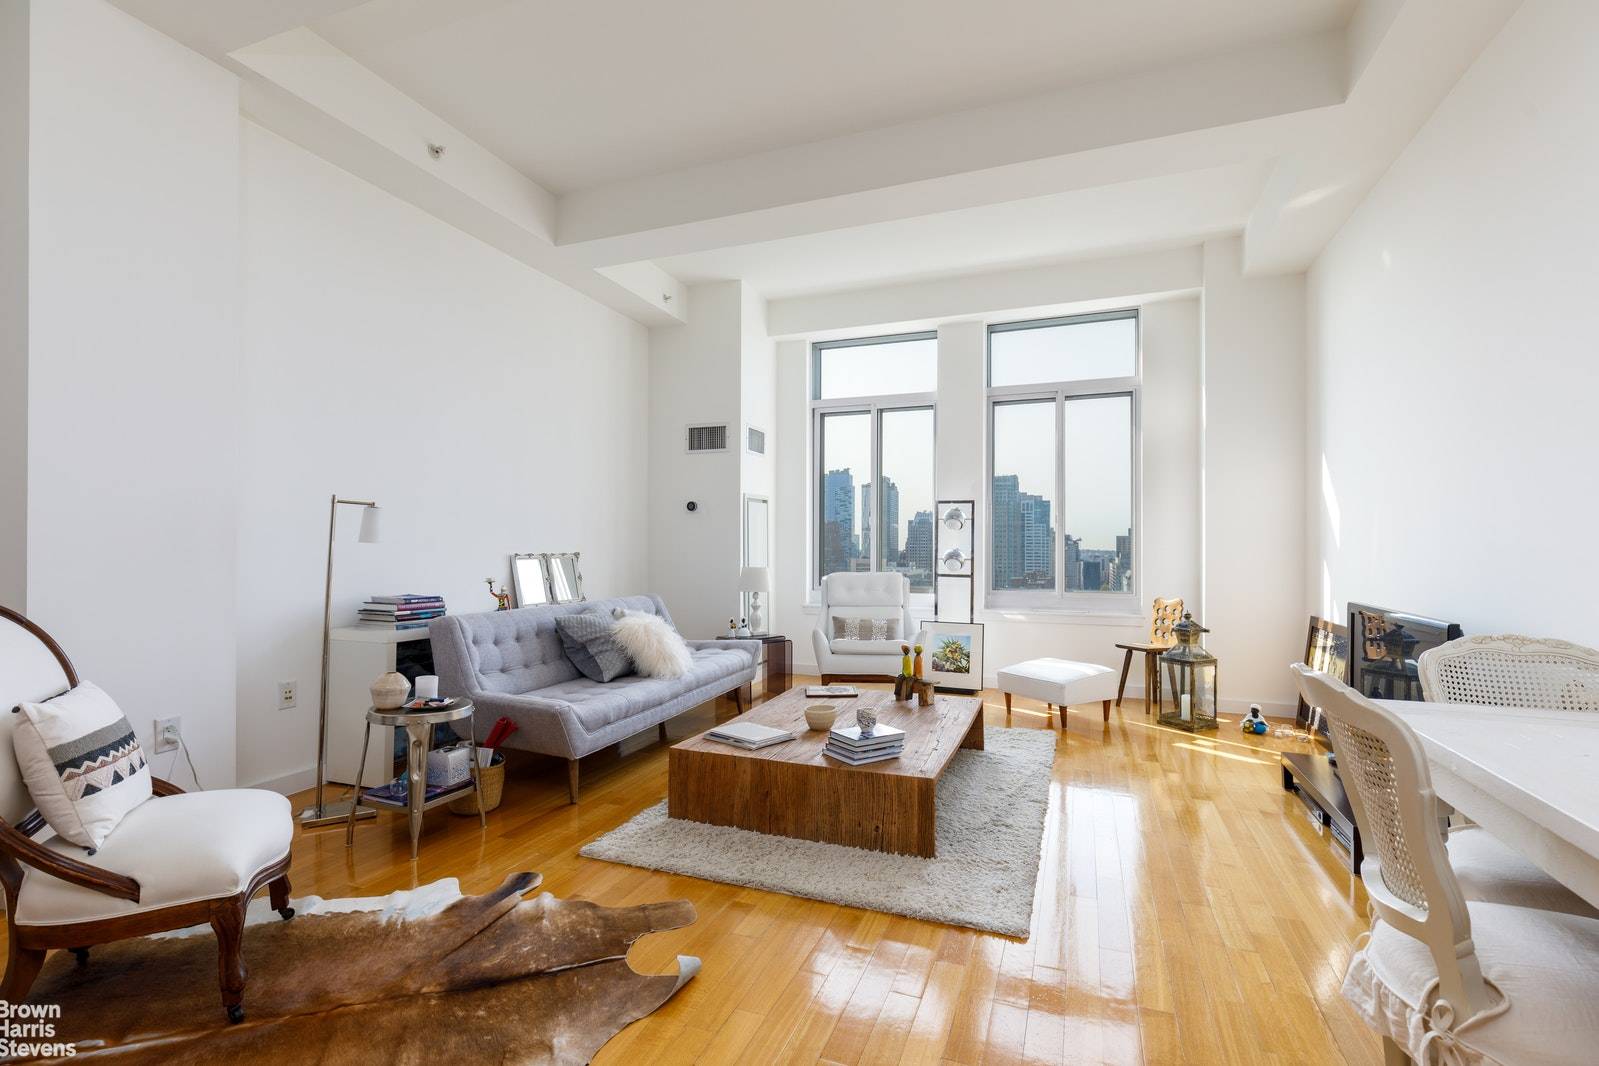 Stylishly designed this one bedroom home nestled in the heart of Dumbo will make your jaw drop.